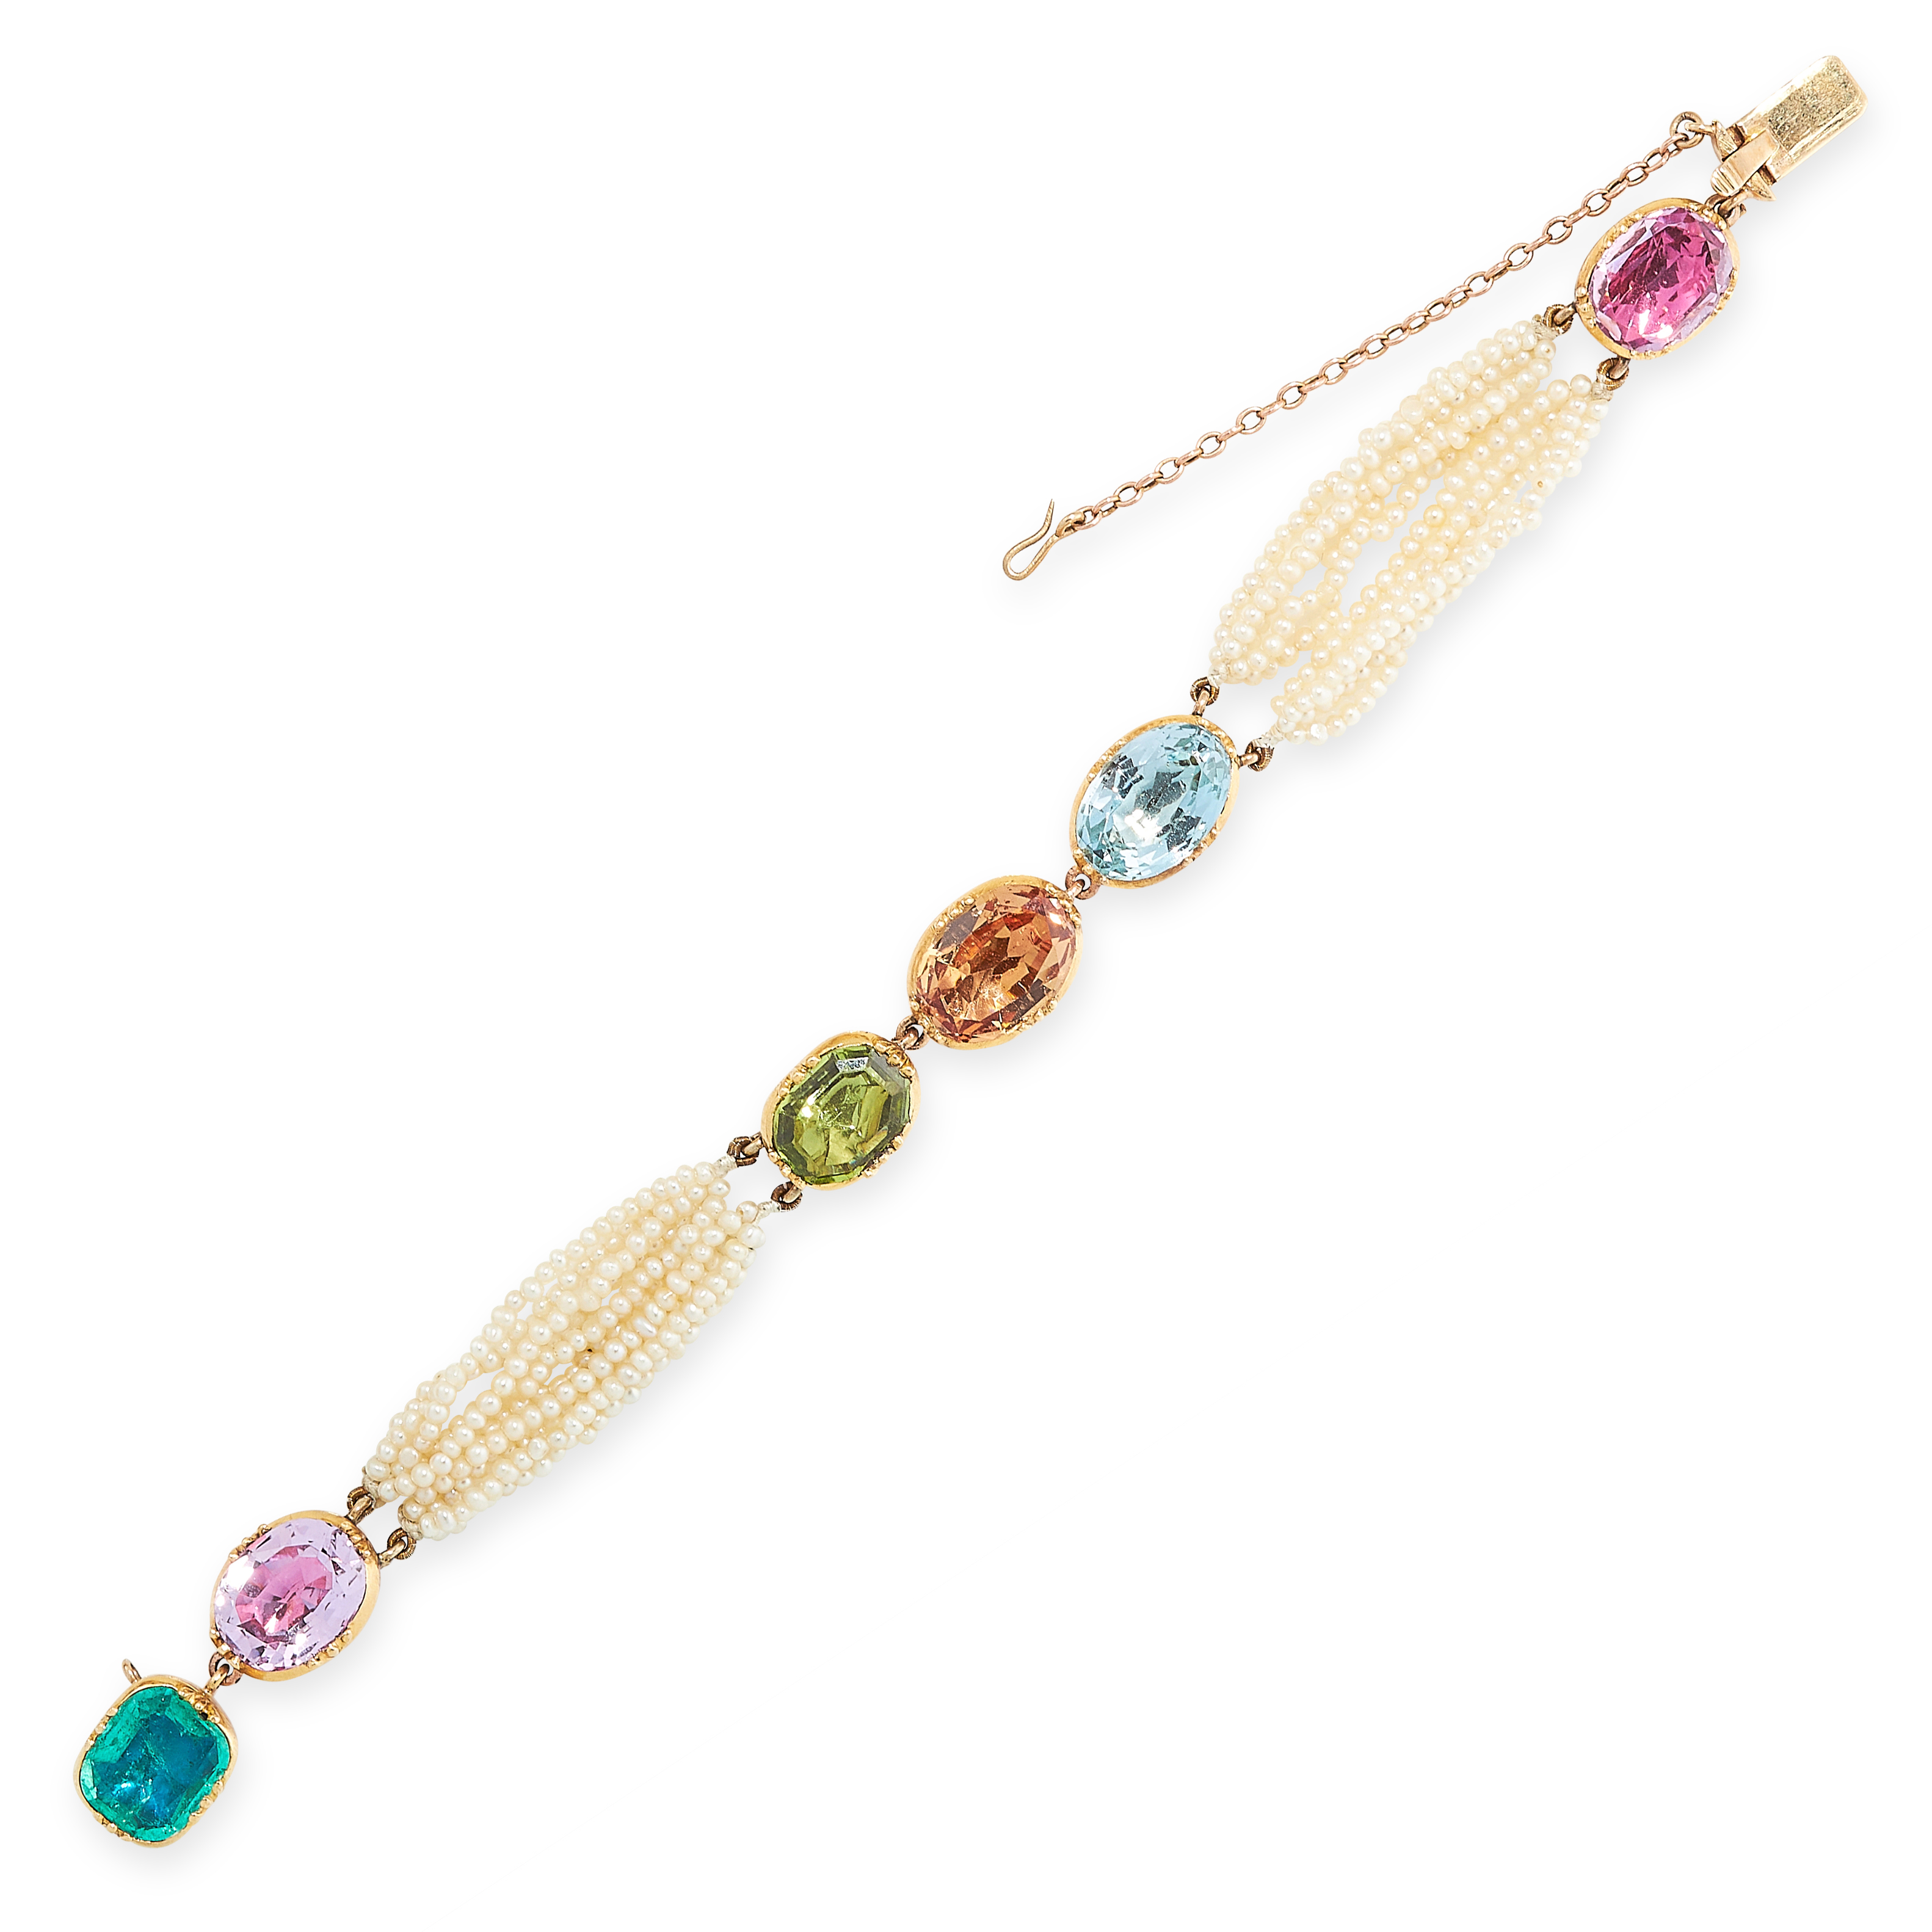 EMERALD, AQUAMARINE, PINK & GOLDEN TOPAZ, PERIDOT AND SEED PEARL BRACELET, 19TH CENTURY, COMPOSITE